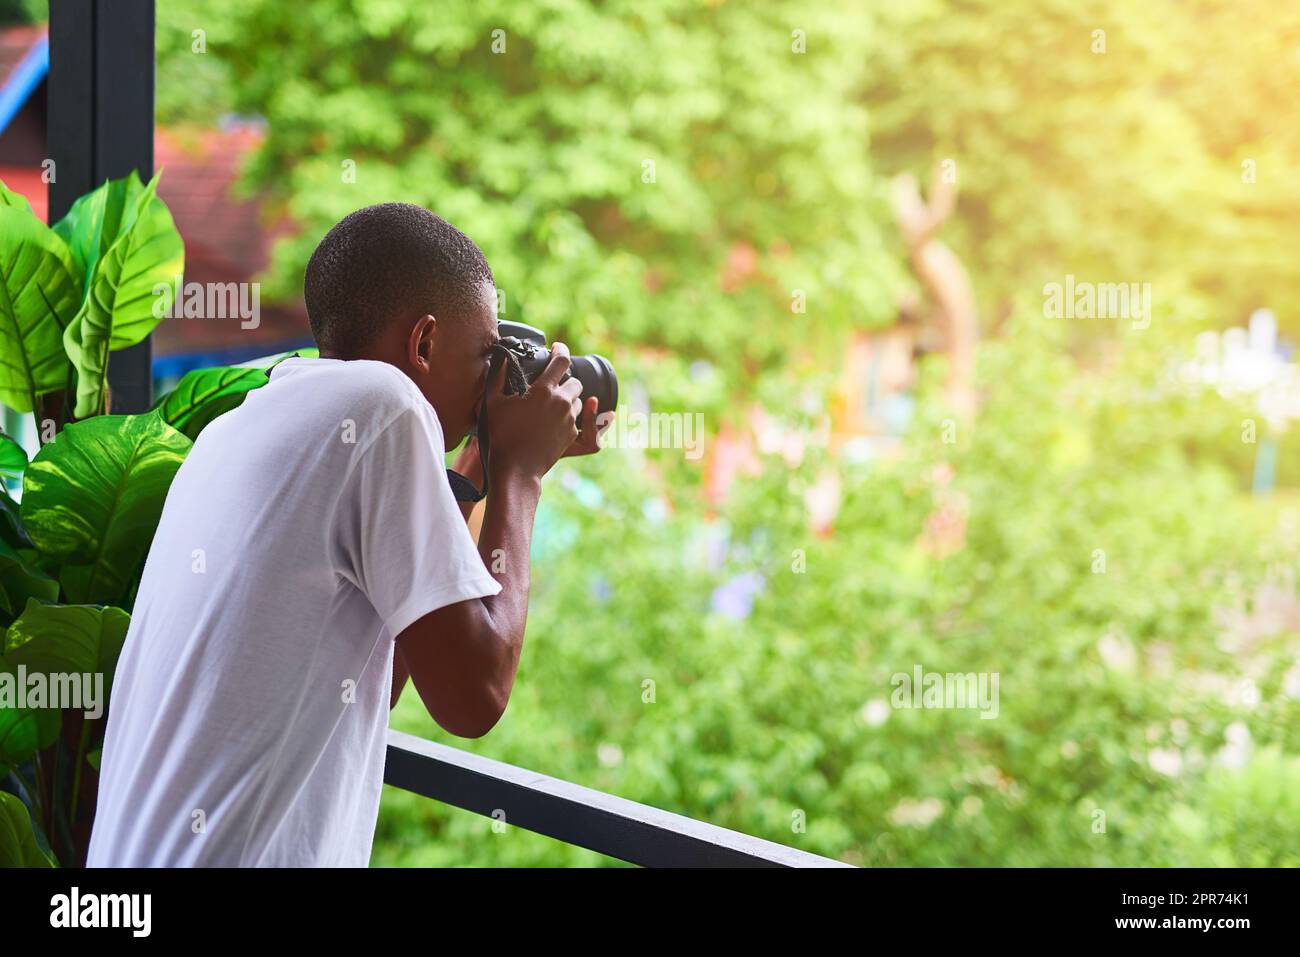 He loves shooting people from his balcony. Shot of an unidentifiable tourist taking a picture from his balcony. Stock Photo